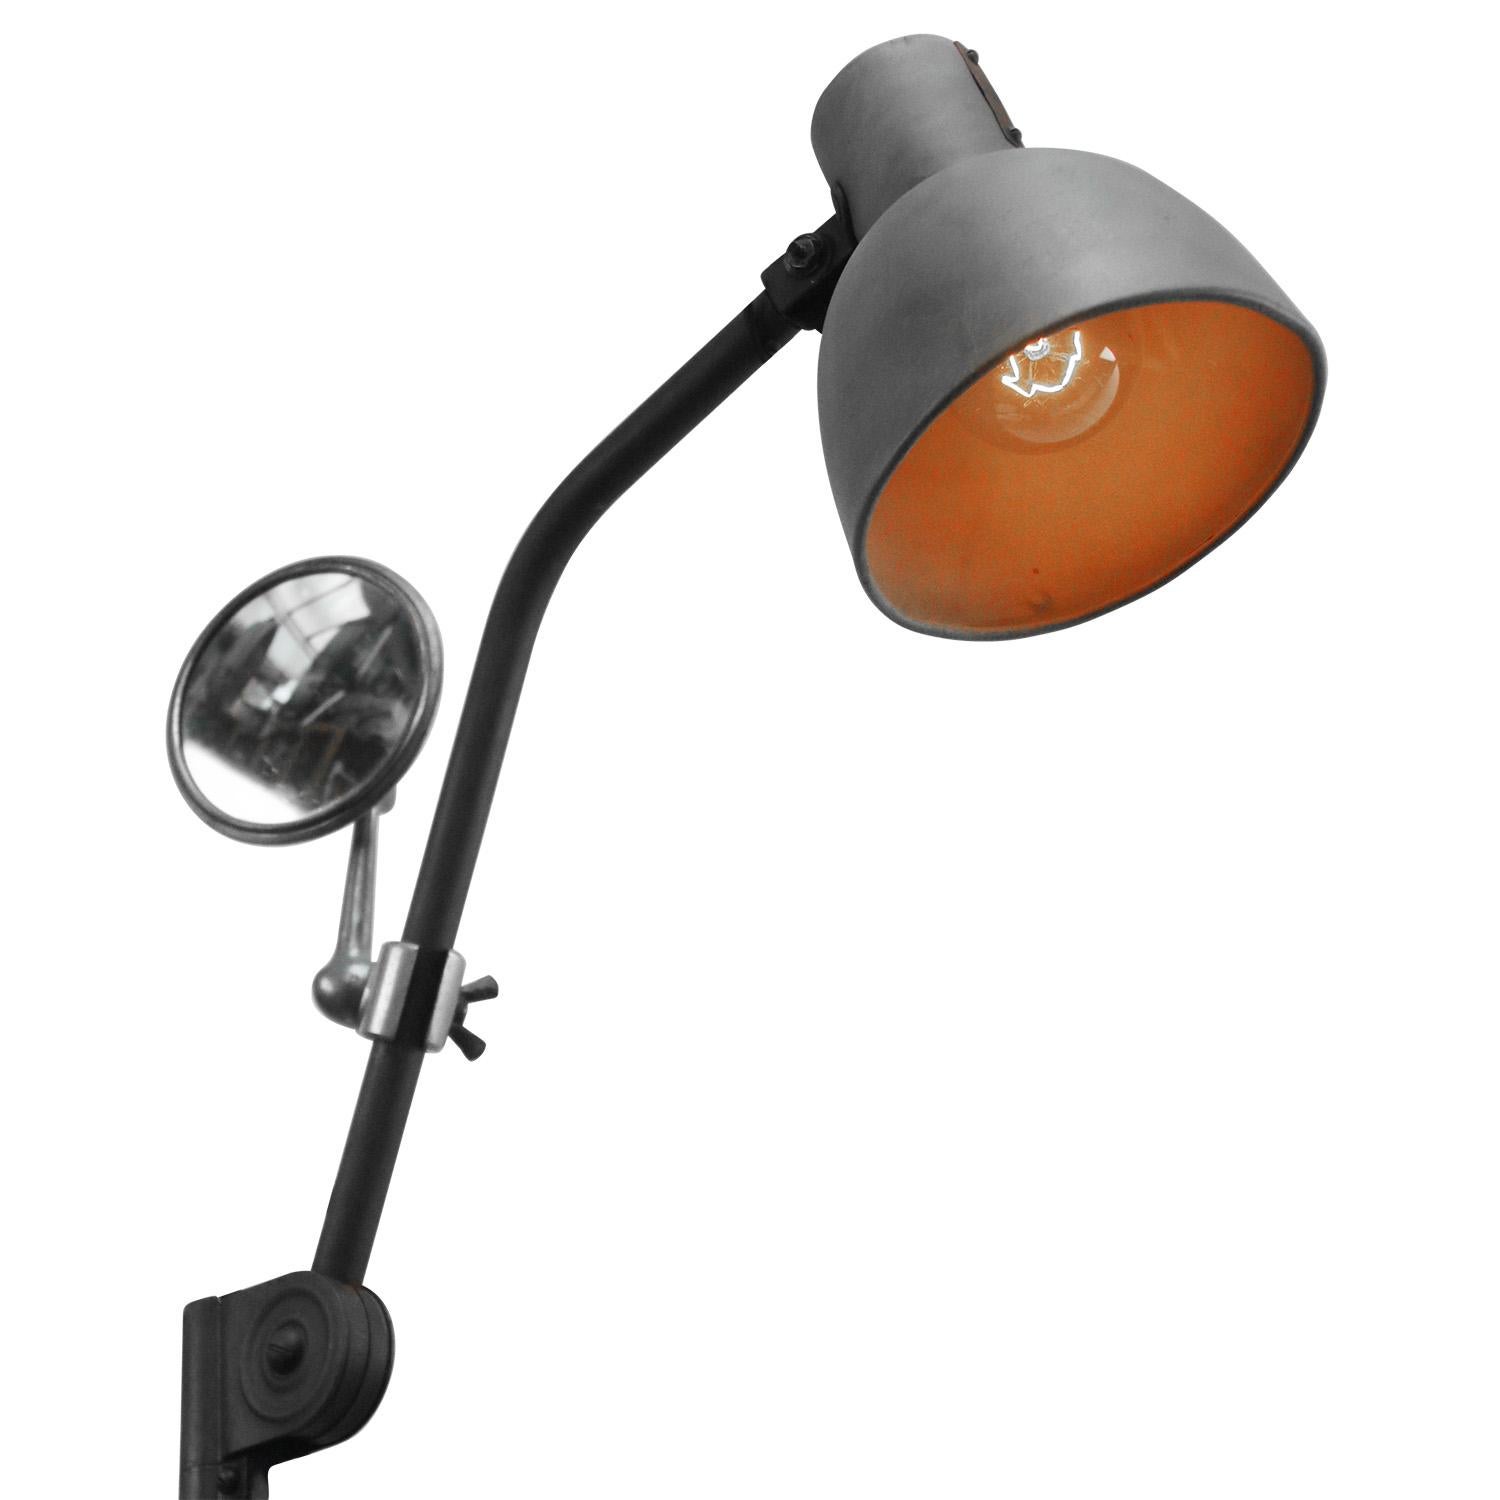 Grey metal industrial 2 arm work light by Hala, Zeist, The Netherlands. Design H. Busquet.
adjustable in height and angle + mirror
including plug and switch

Weight: 2.10 kg / 4.6 lb

Priced per individual item. All lamps have been made